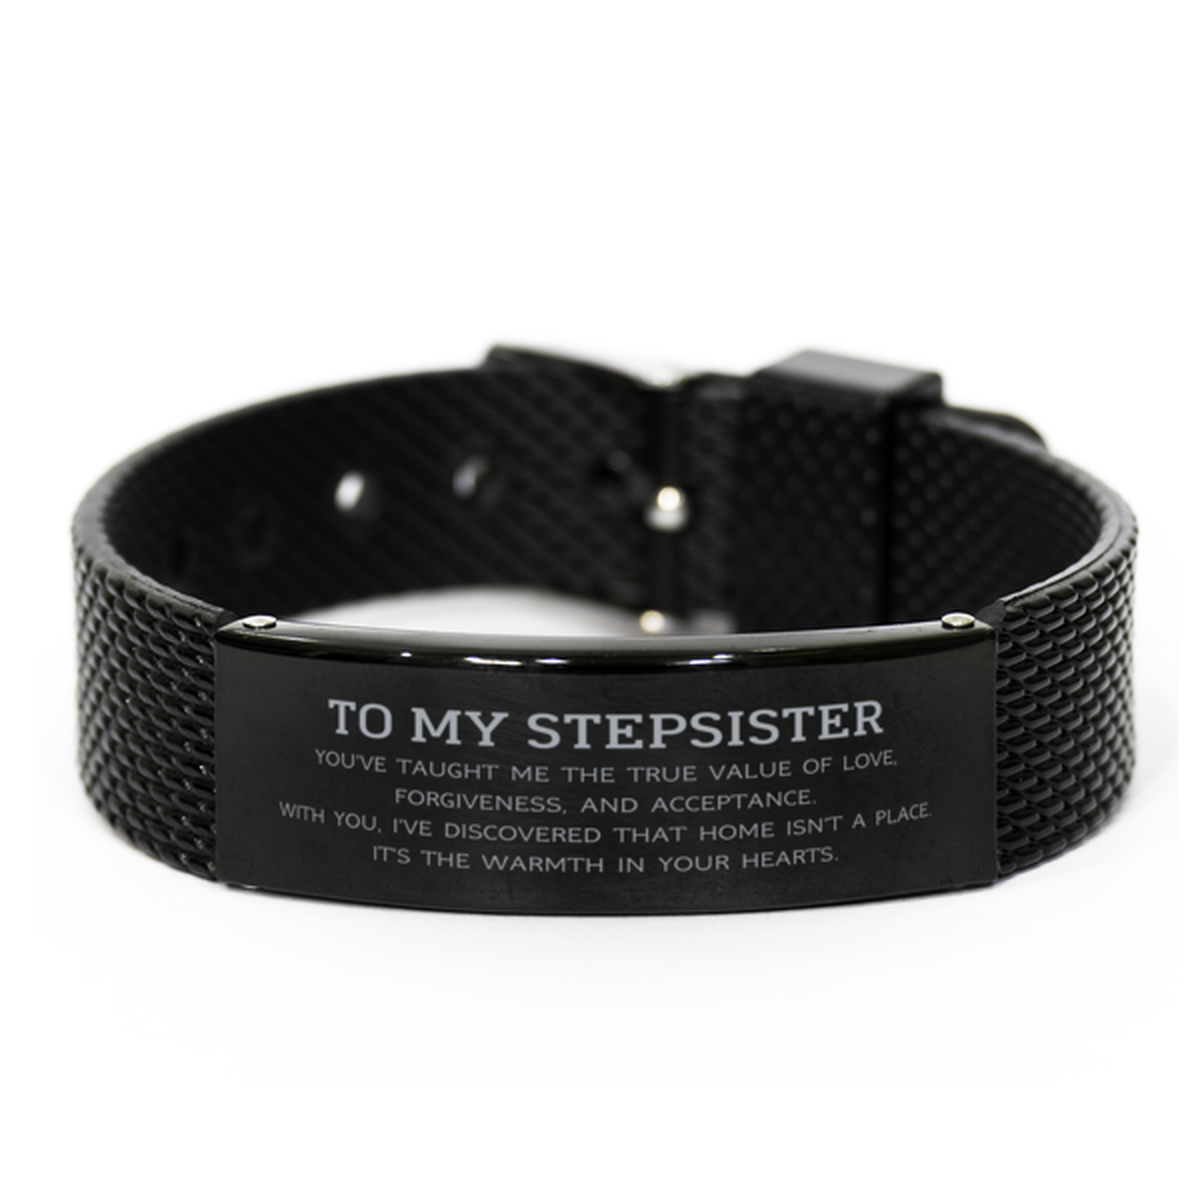 To My Stepsister Gifts, You've taught me the true value of love, Thank You Gifts For Stepsister, Birthday Black Shark Mesh Bracelet For Stepsister